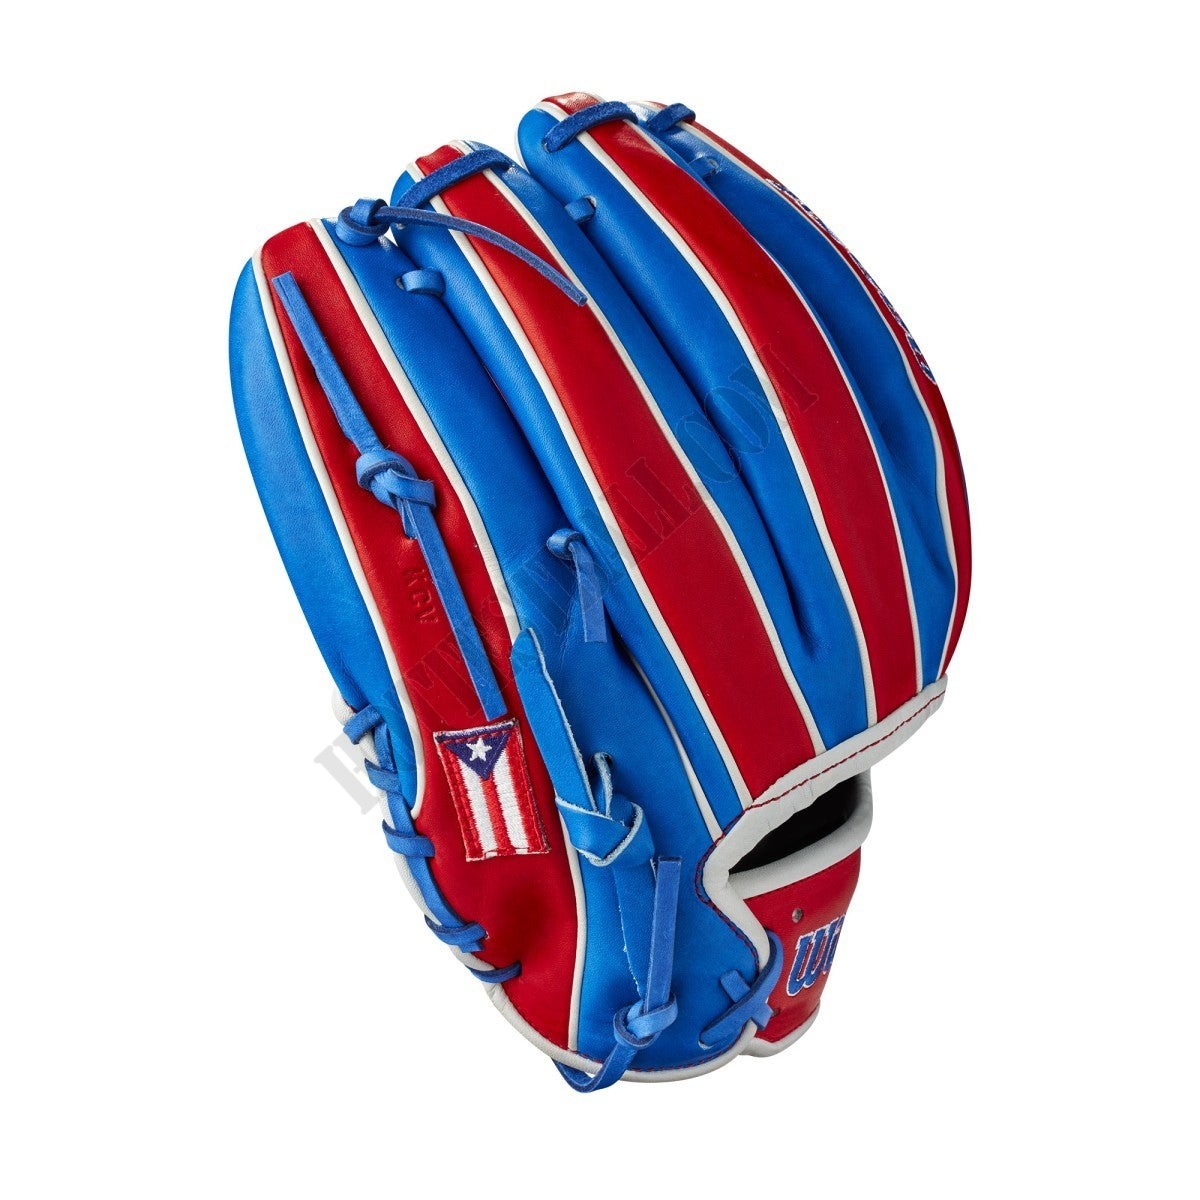 2021 A2000 1786 Puerto Rico 11.5" Infield Baseball Glove - Limited Edition ● Wilson Promotions - -4